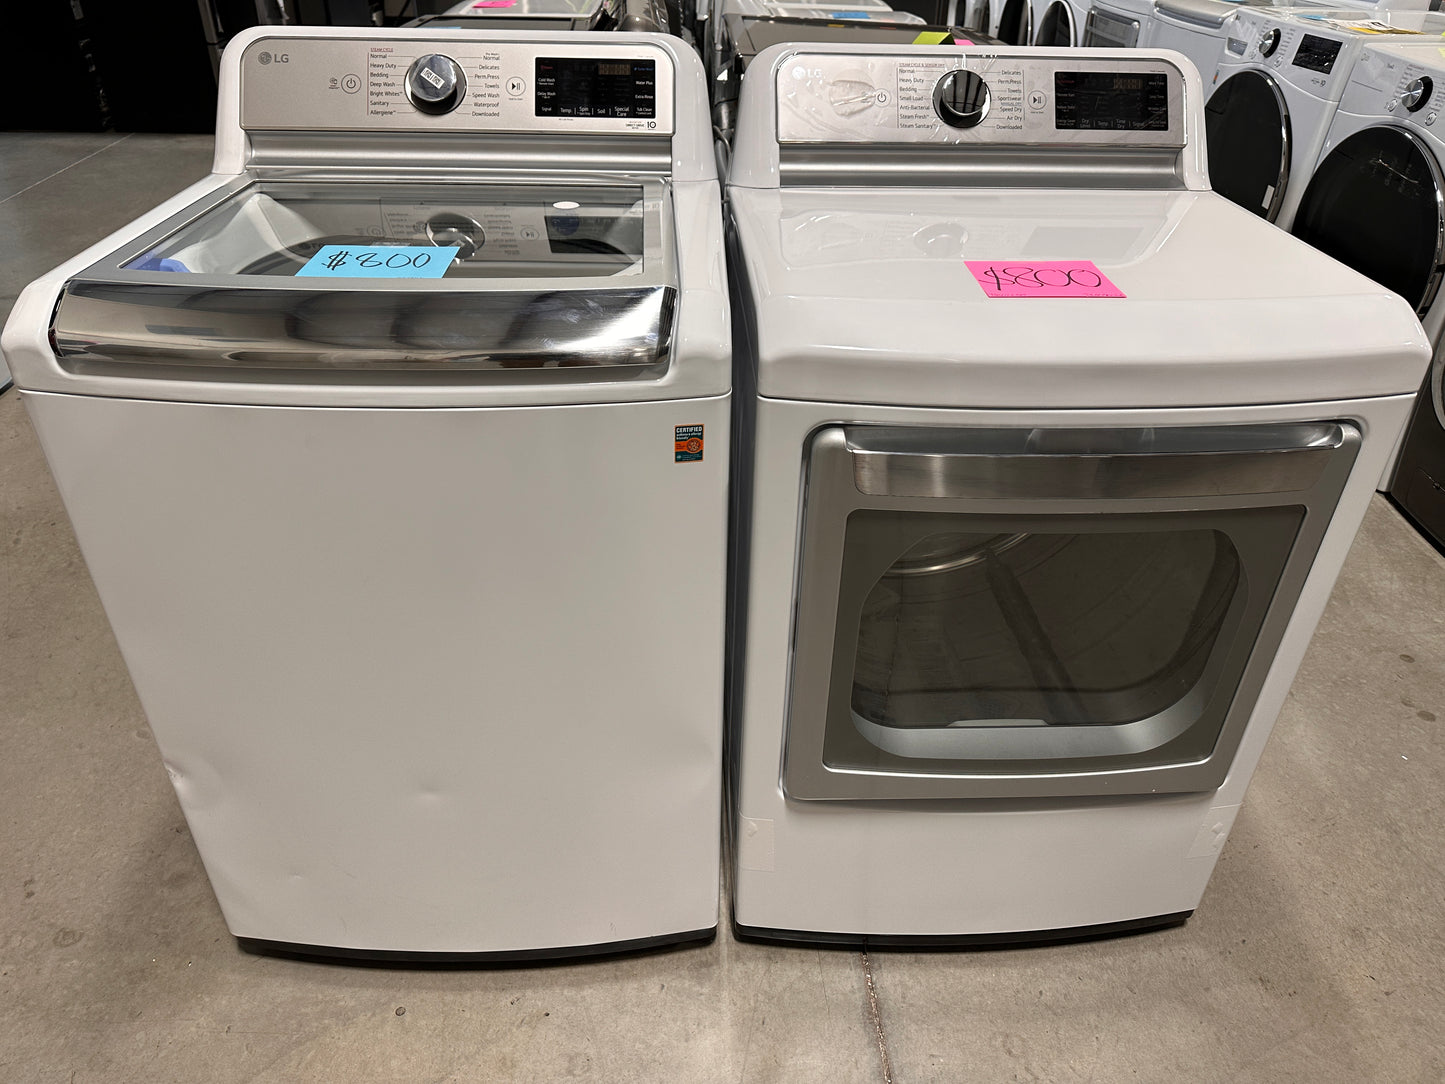 GREAT NEW LG TOP LOAD WASHER ELECTRIC DRYER LAUNDRY SET - WAS12888 DRY12250